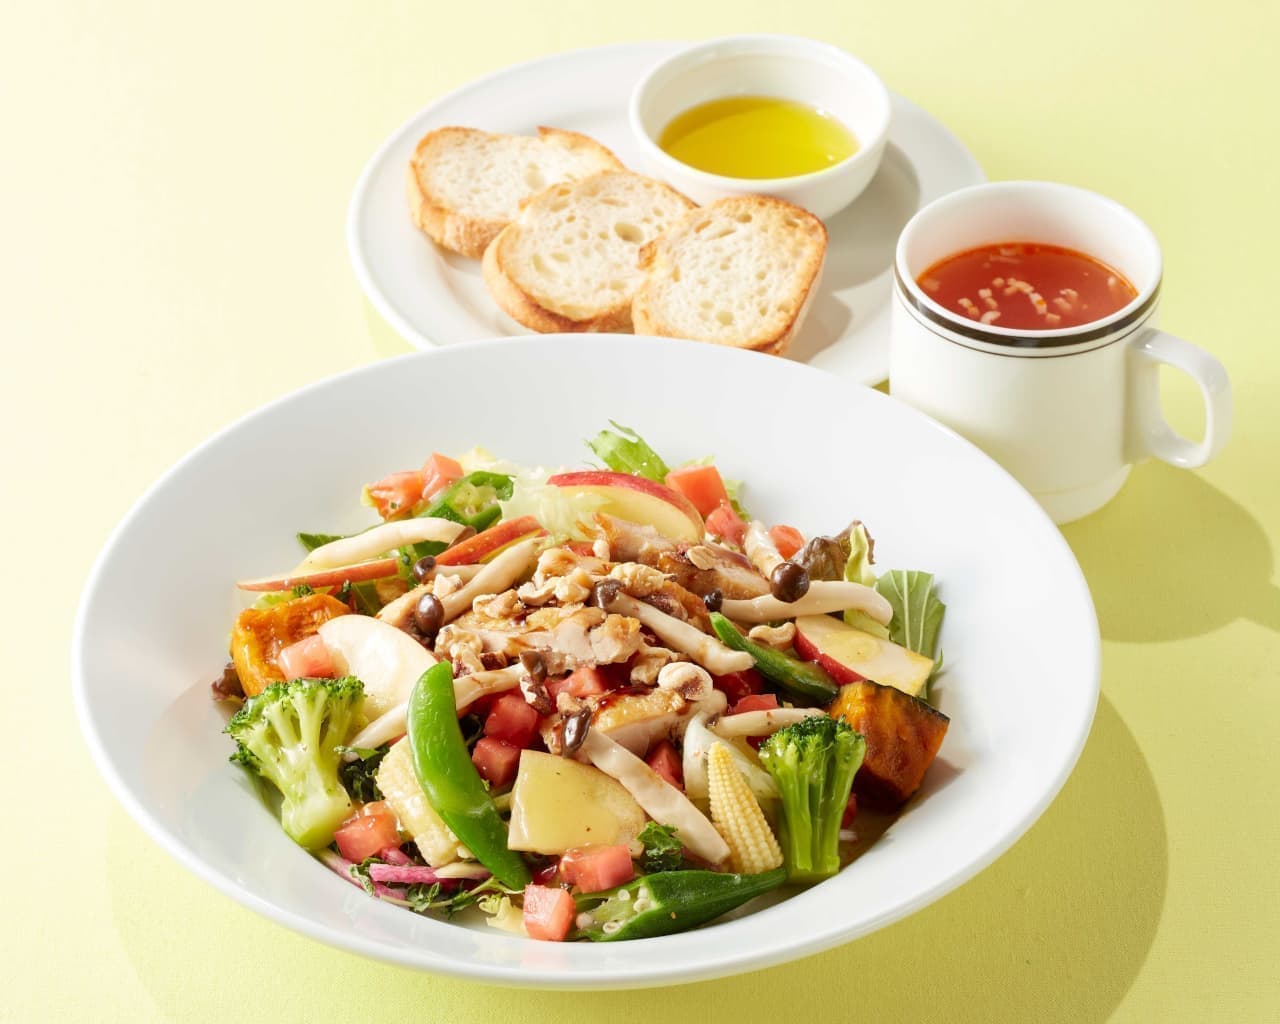 Cocos "11 Vegetable Salad Lunch with Chicken and Apple